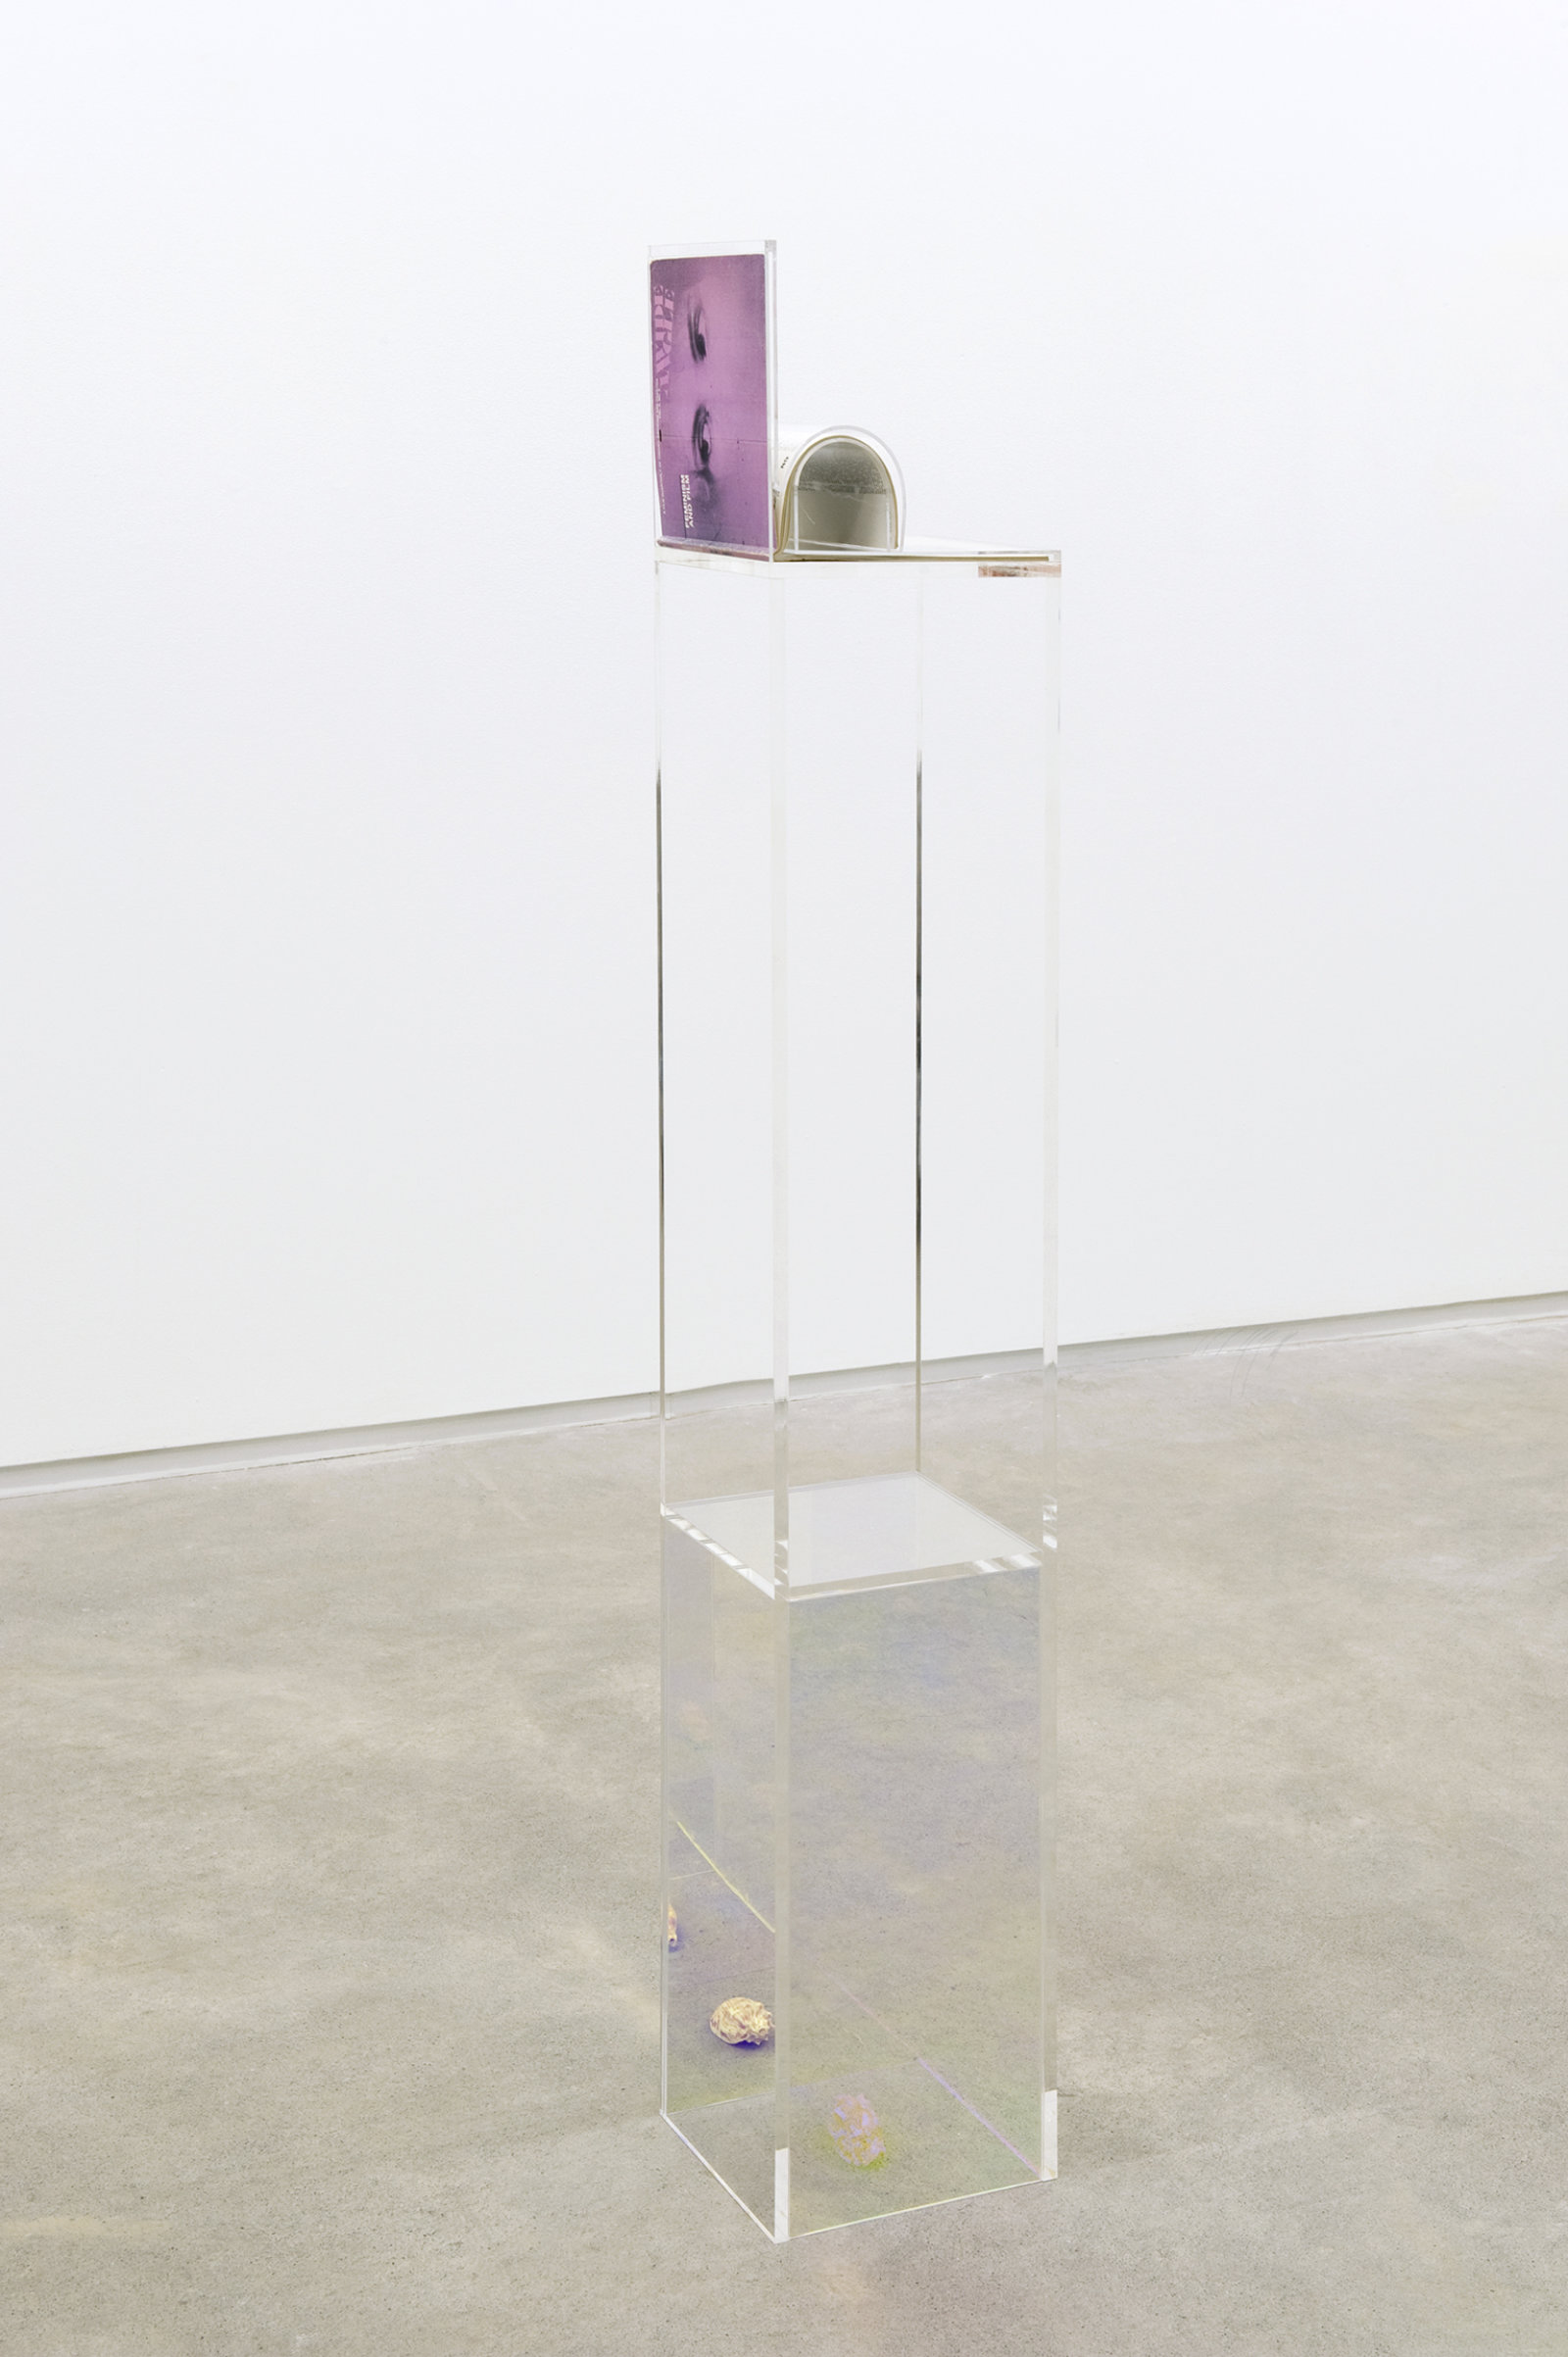 Judy Radul, Women and Film, 2011, dichroic and clear acrylic, copy of Wide Angle magazine (vol. 6, no. 3, special issue on Feminism and Film, 1984), seashell, 60 x 8 x 9 in. (152 x 20 x 23 cm)